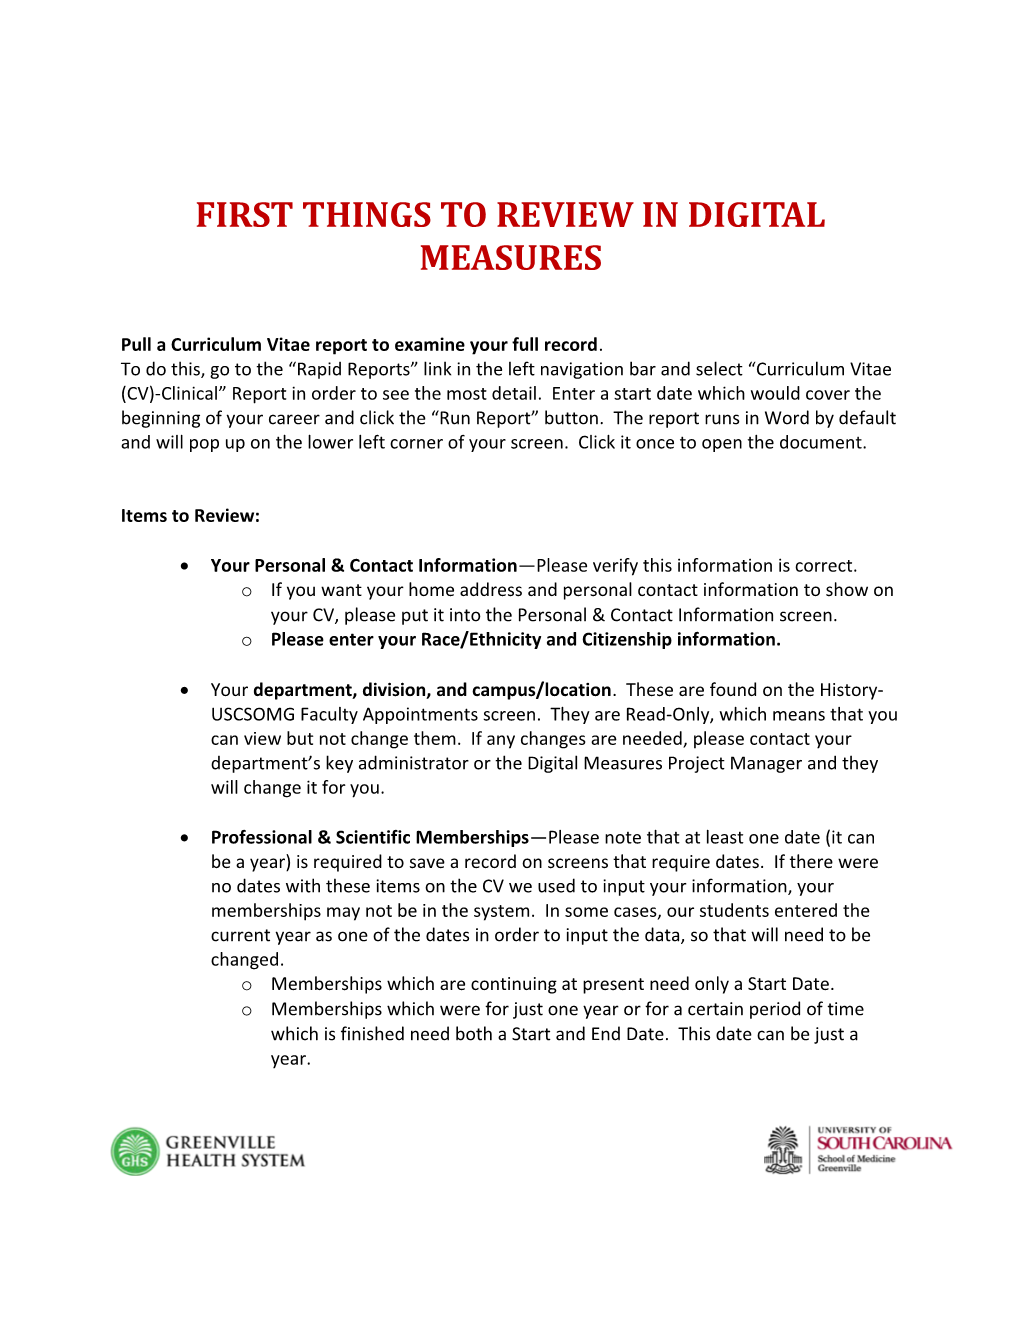 First Things to Review in Digital Measures